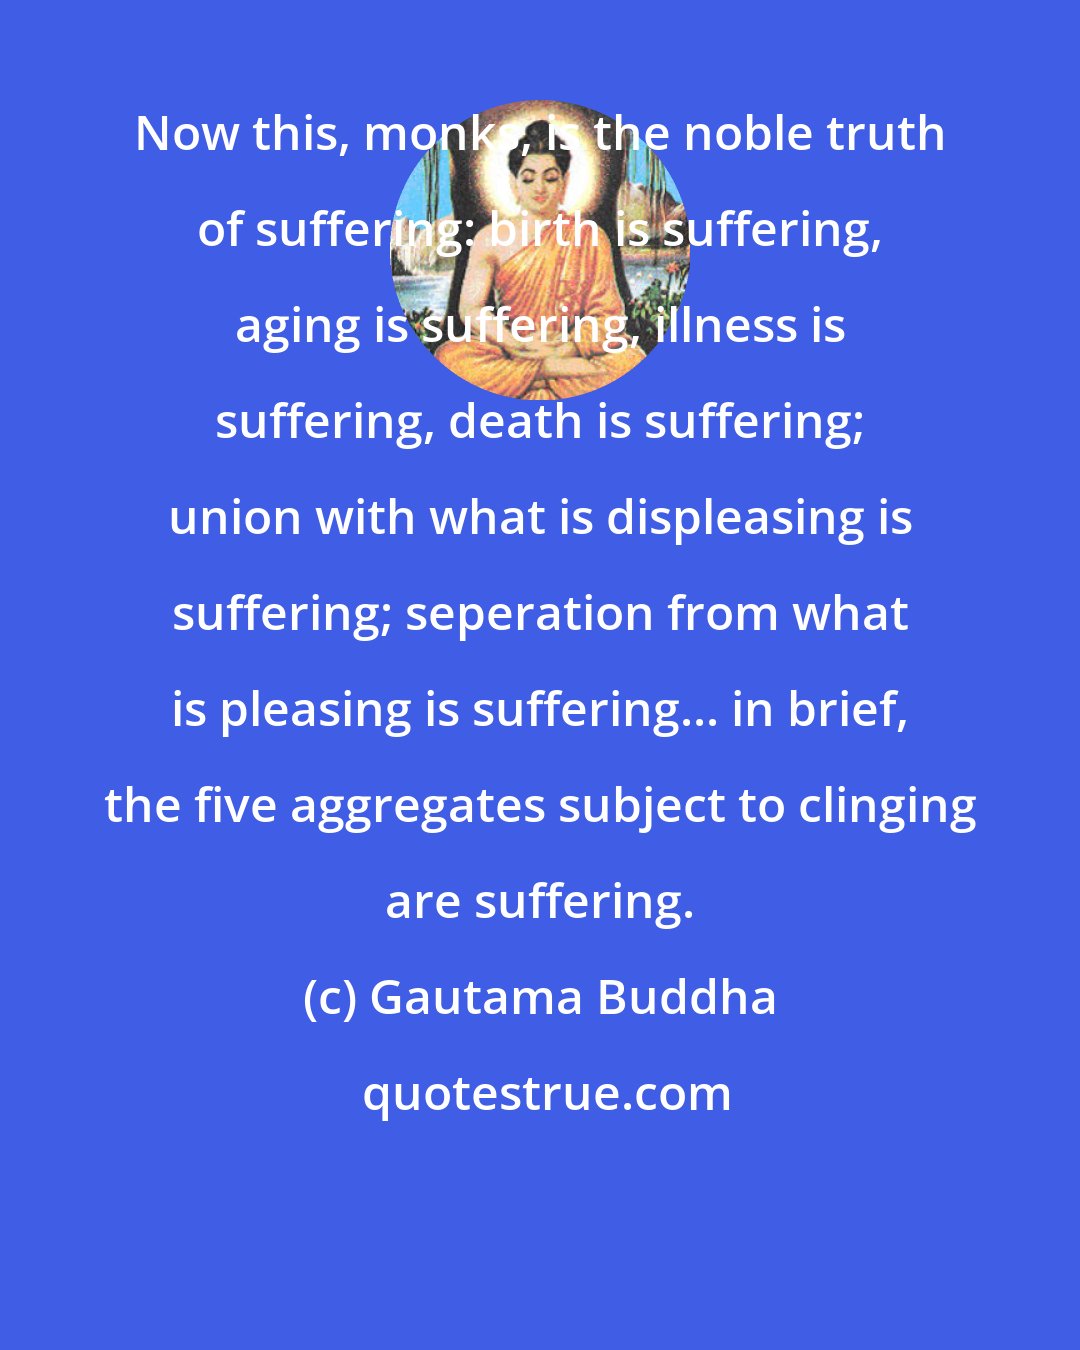 Gautama Buddha: Now this, monks, is the noble truth of suffering: birth is suffering, aging is suffering, illness is suffering, death is suffering; union with what is displeasing is suffering; seperation from what is pleasing is suffering... in brief, the five aggregates subject to clinging are suffering.